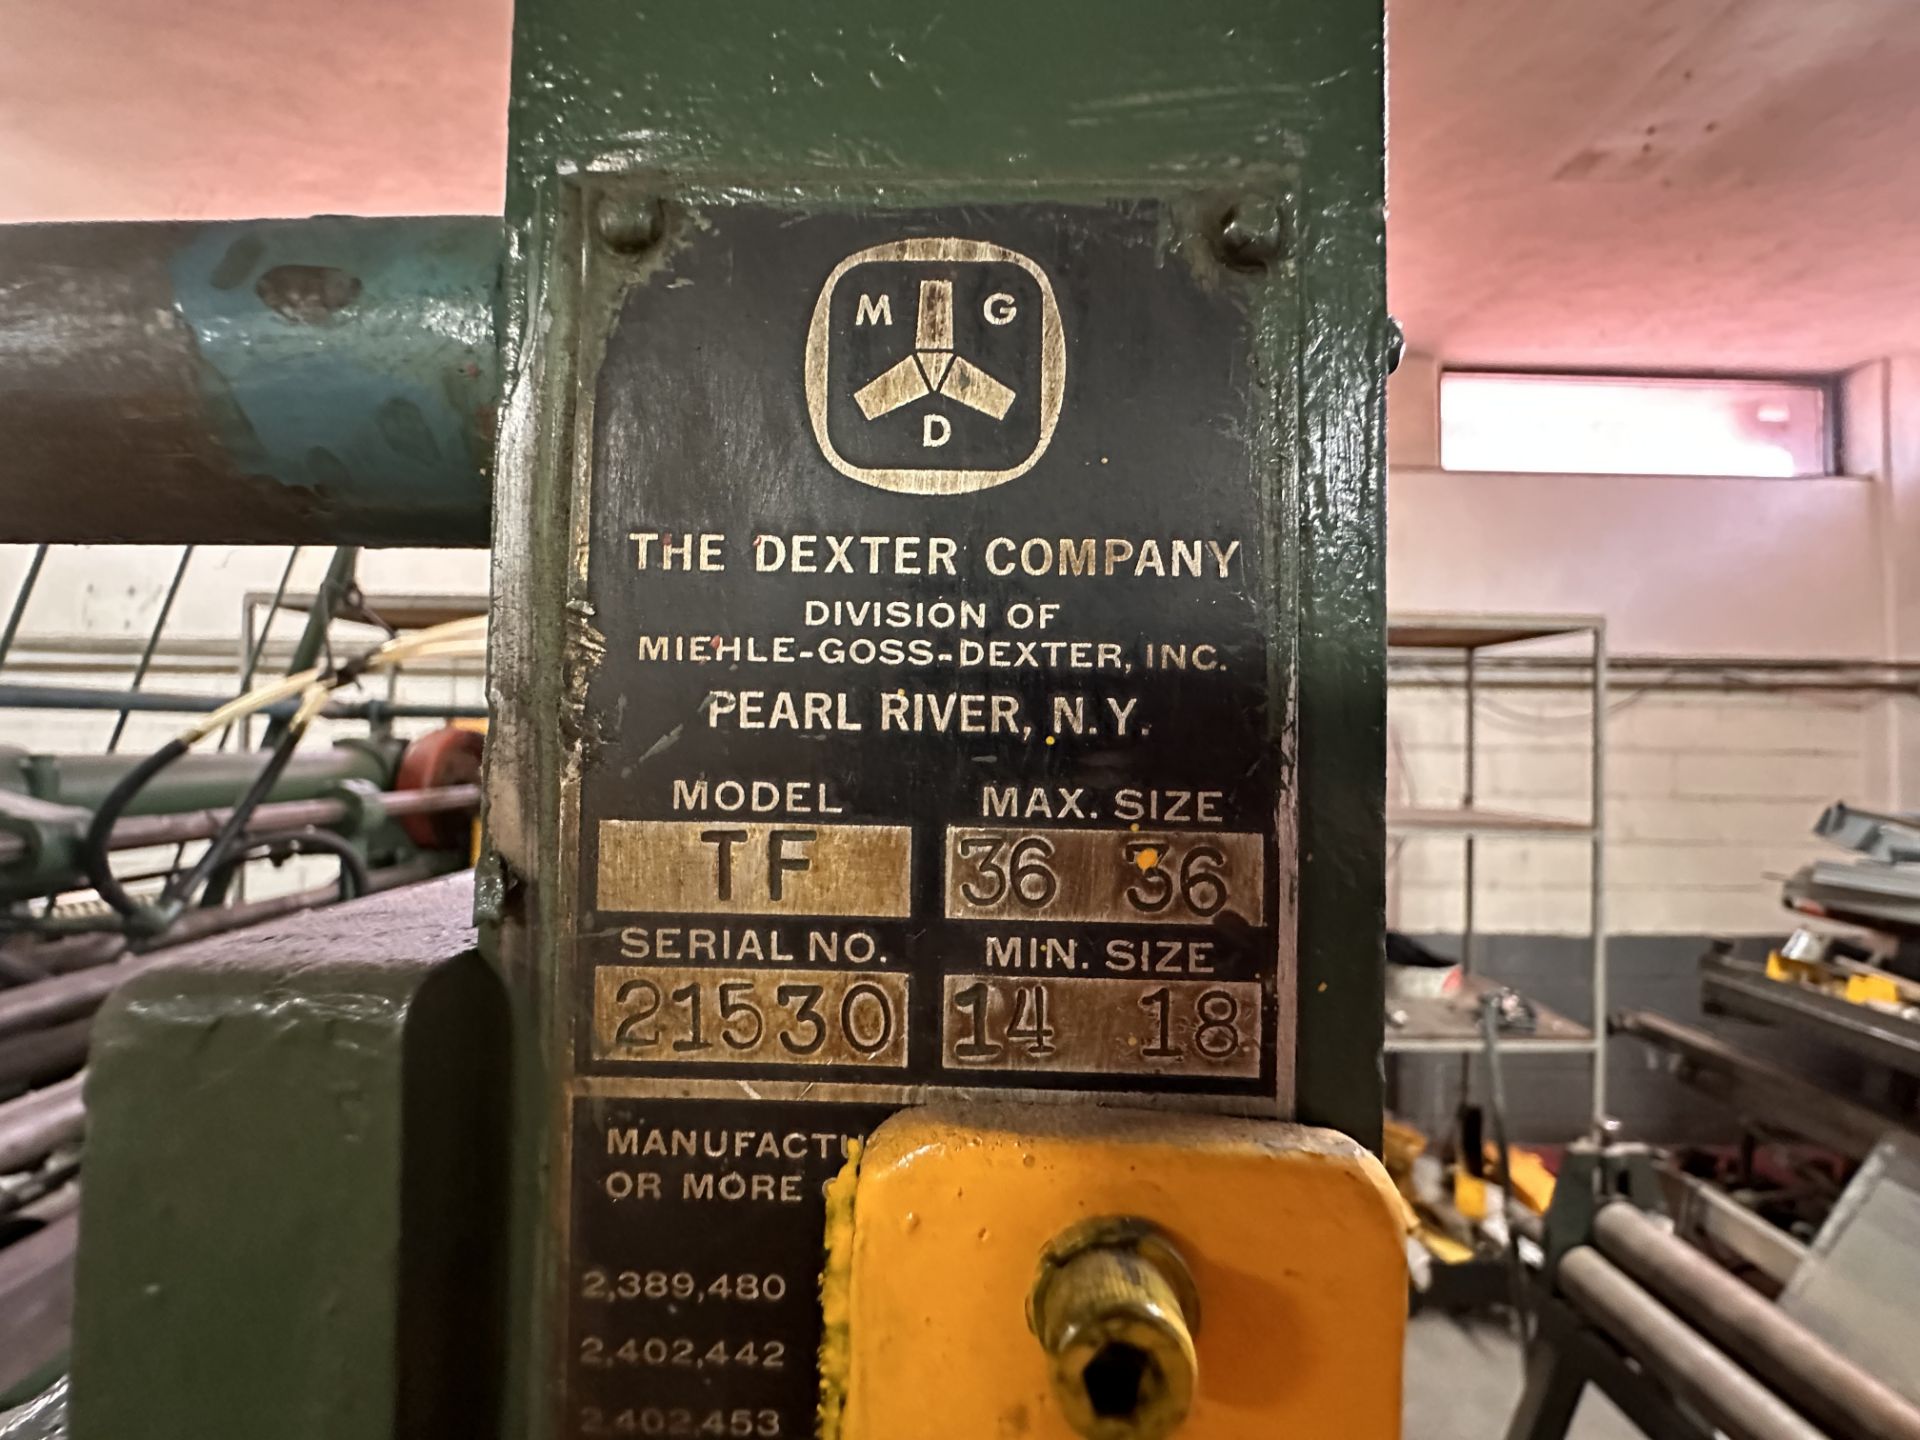 The Dexter Company Elevator, elevator or laminate receiver , Model TF, Serial No. 21530, Year ND, 2 - Image 11 of 13